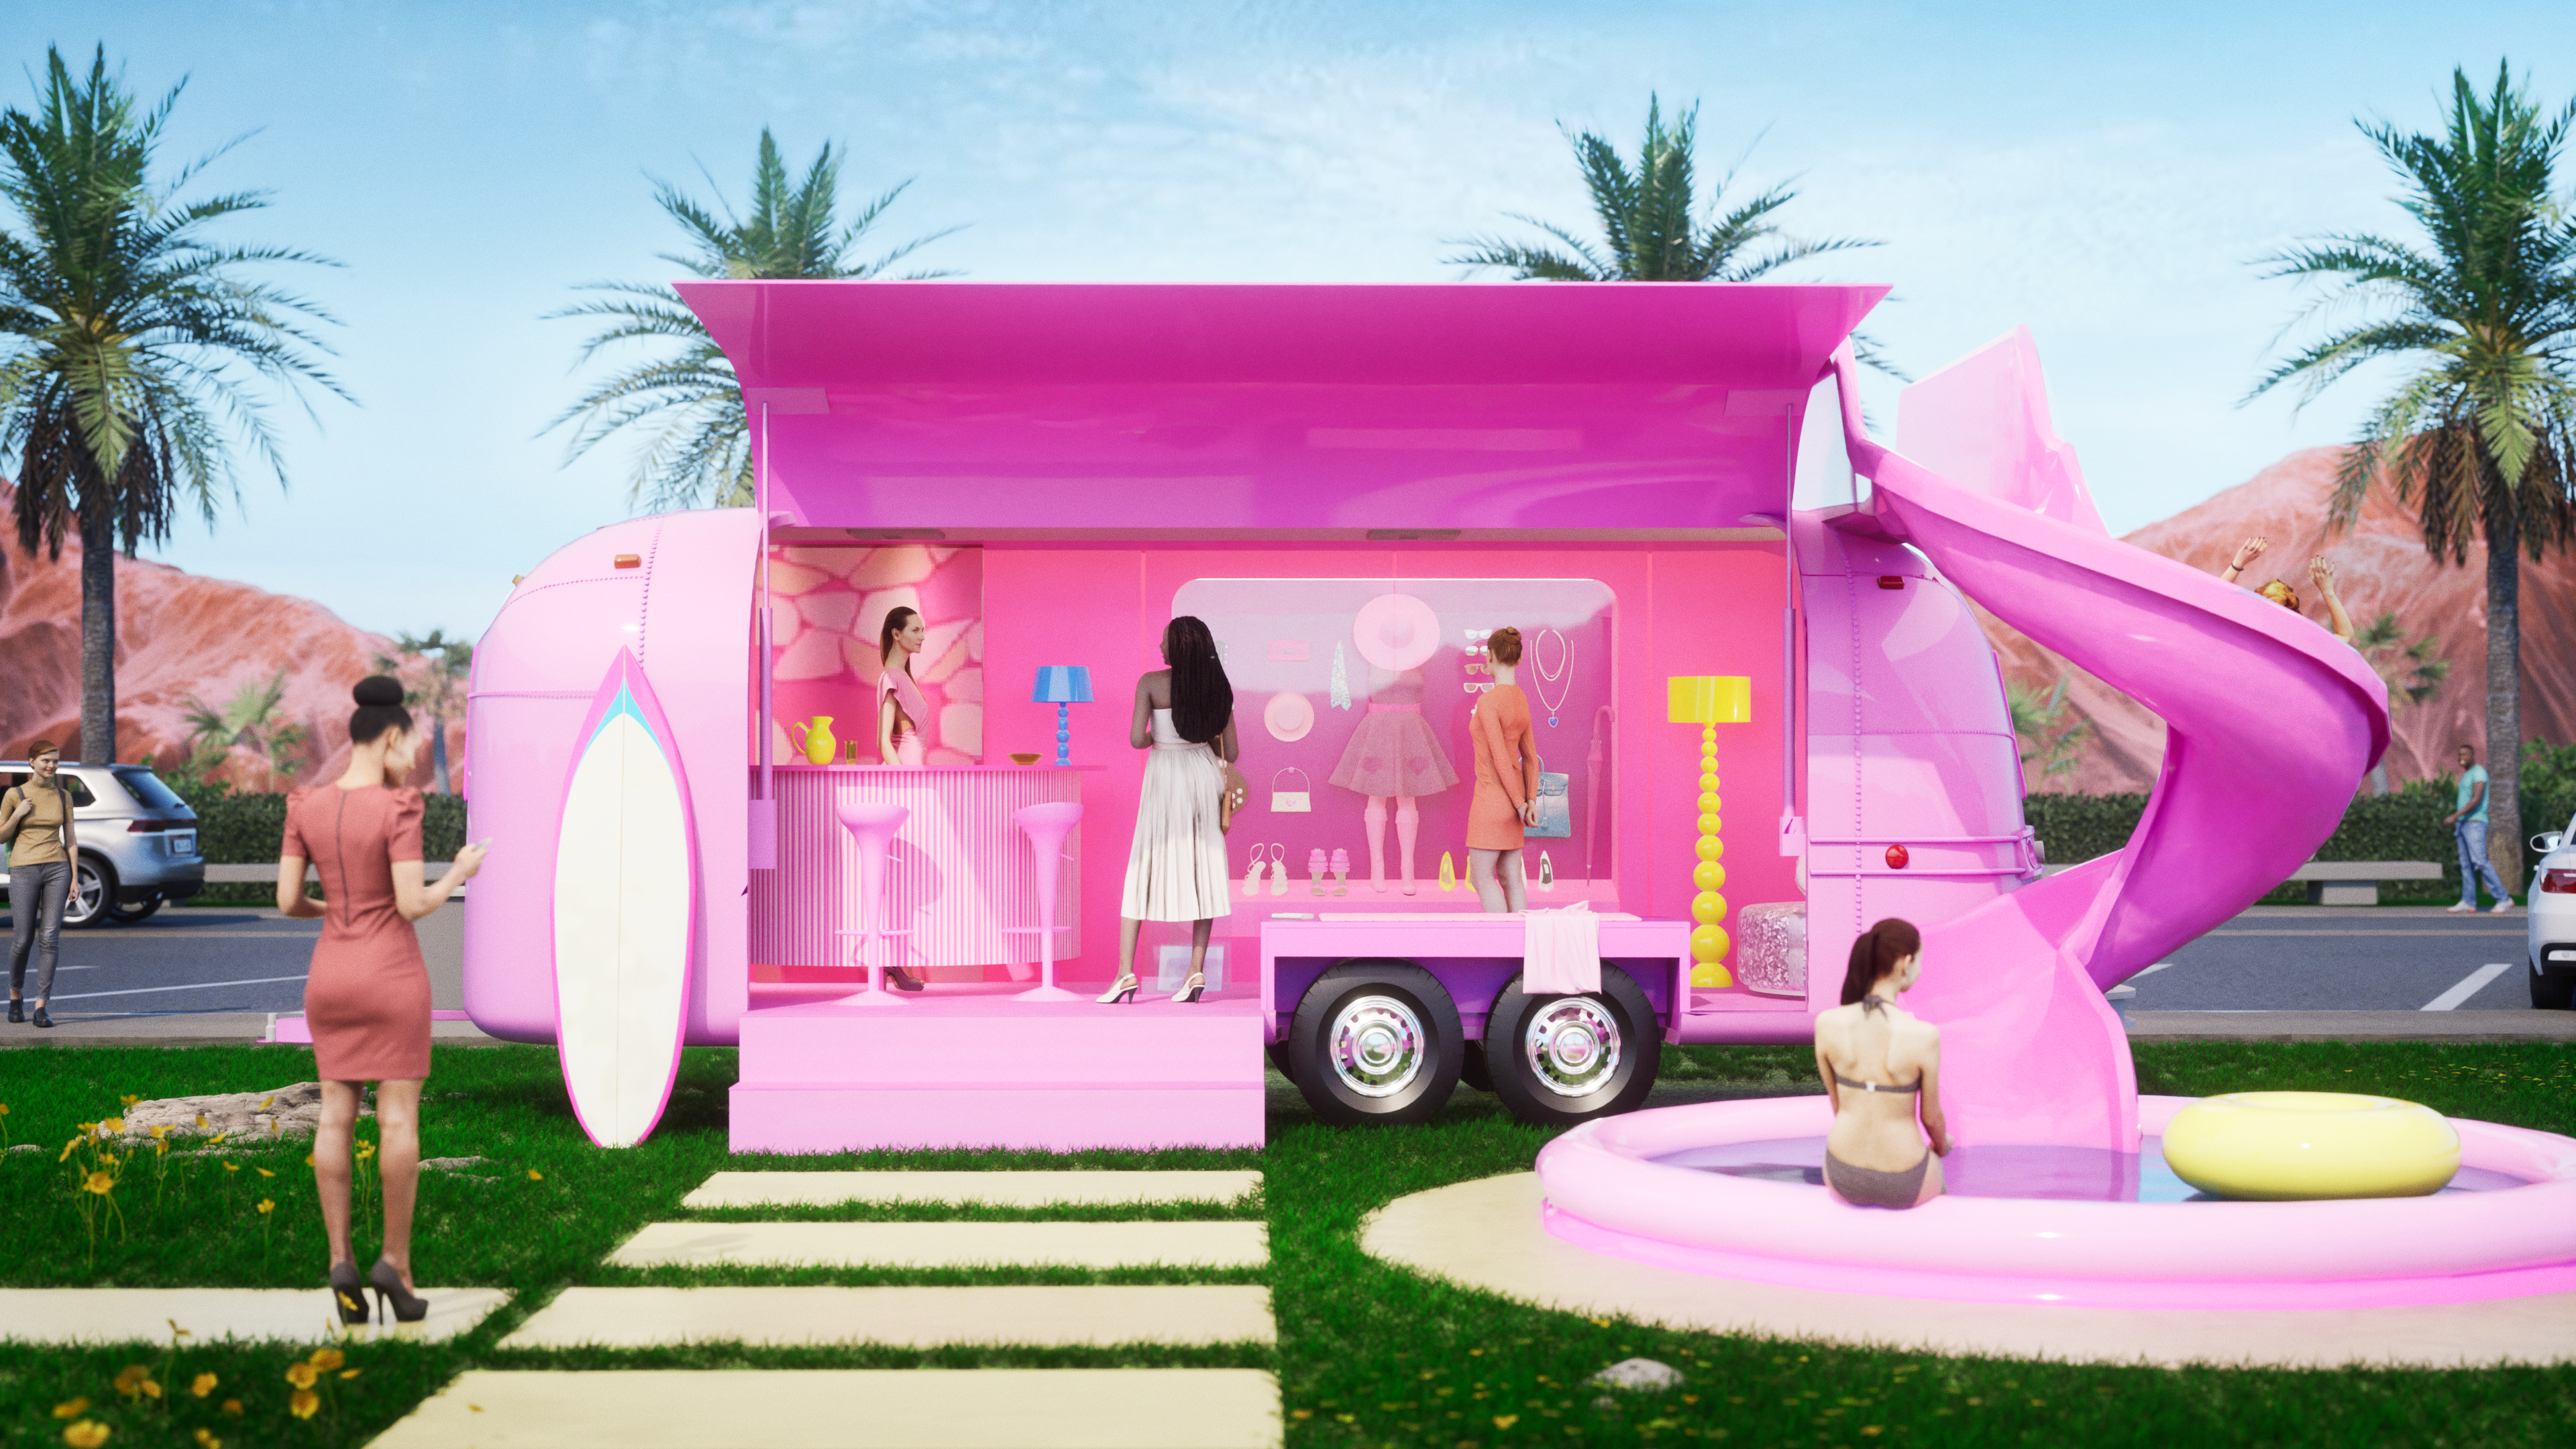 Rendering of a Barbie themed pink airstream with a water slide a pool and people enjoying the event.